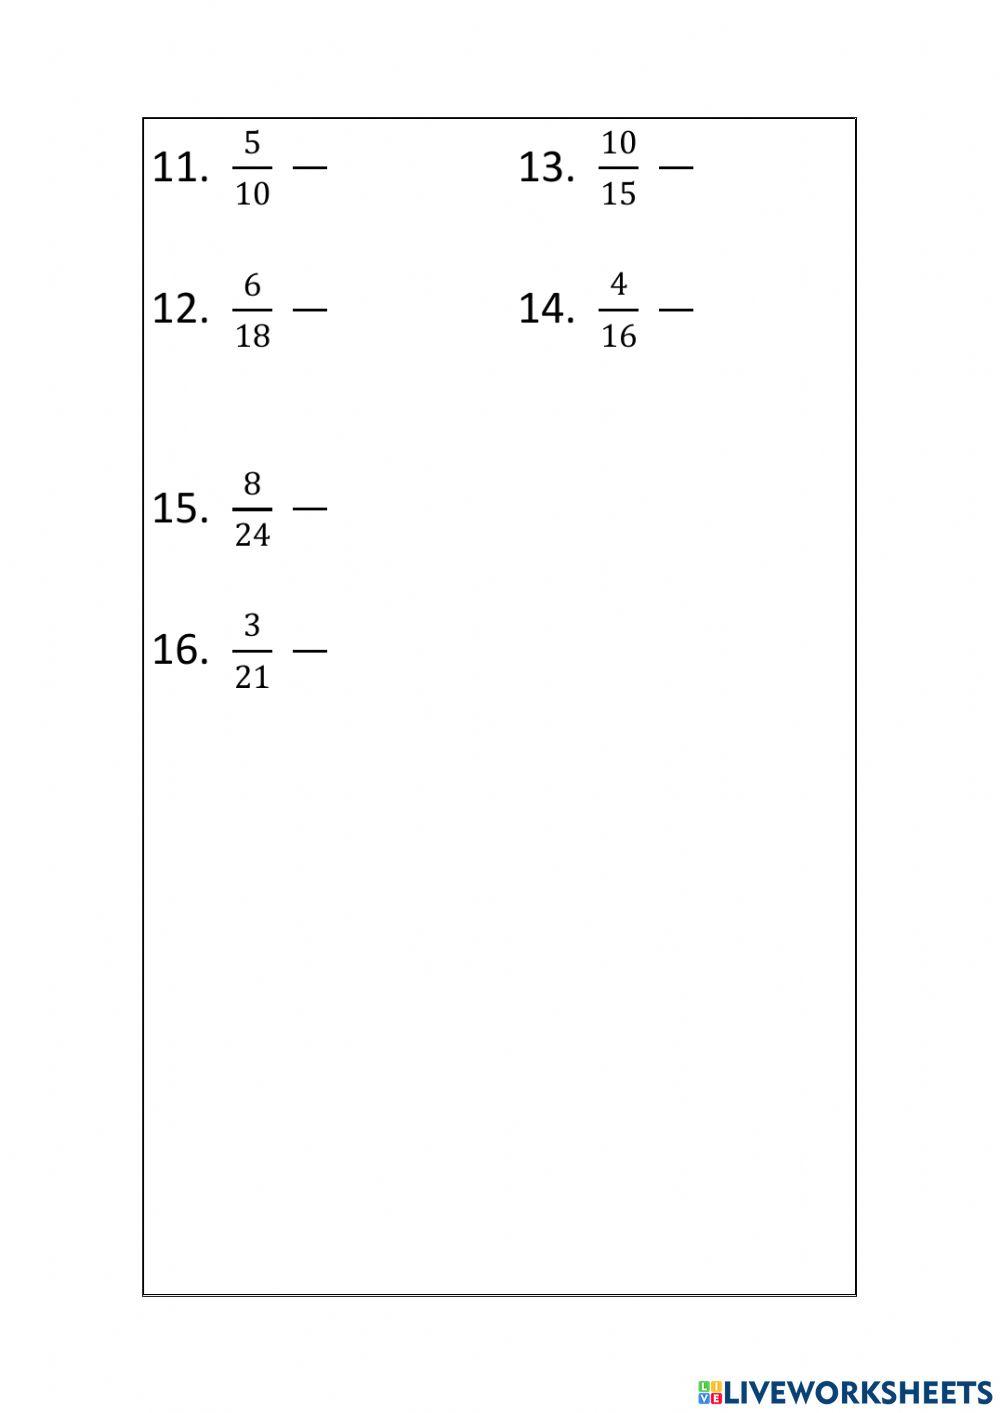 Simplifying Fractions- Equivalent Fractions